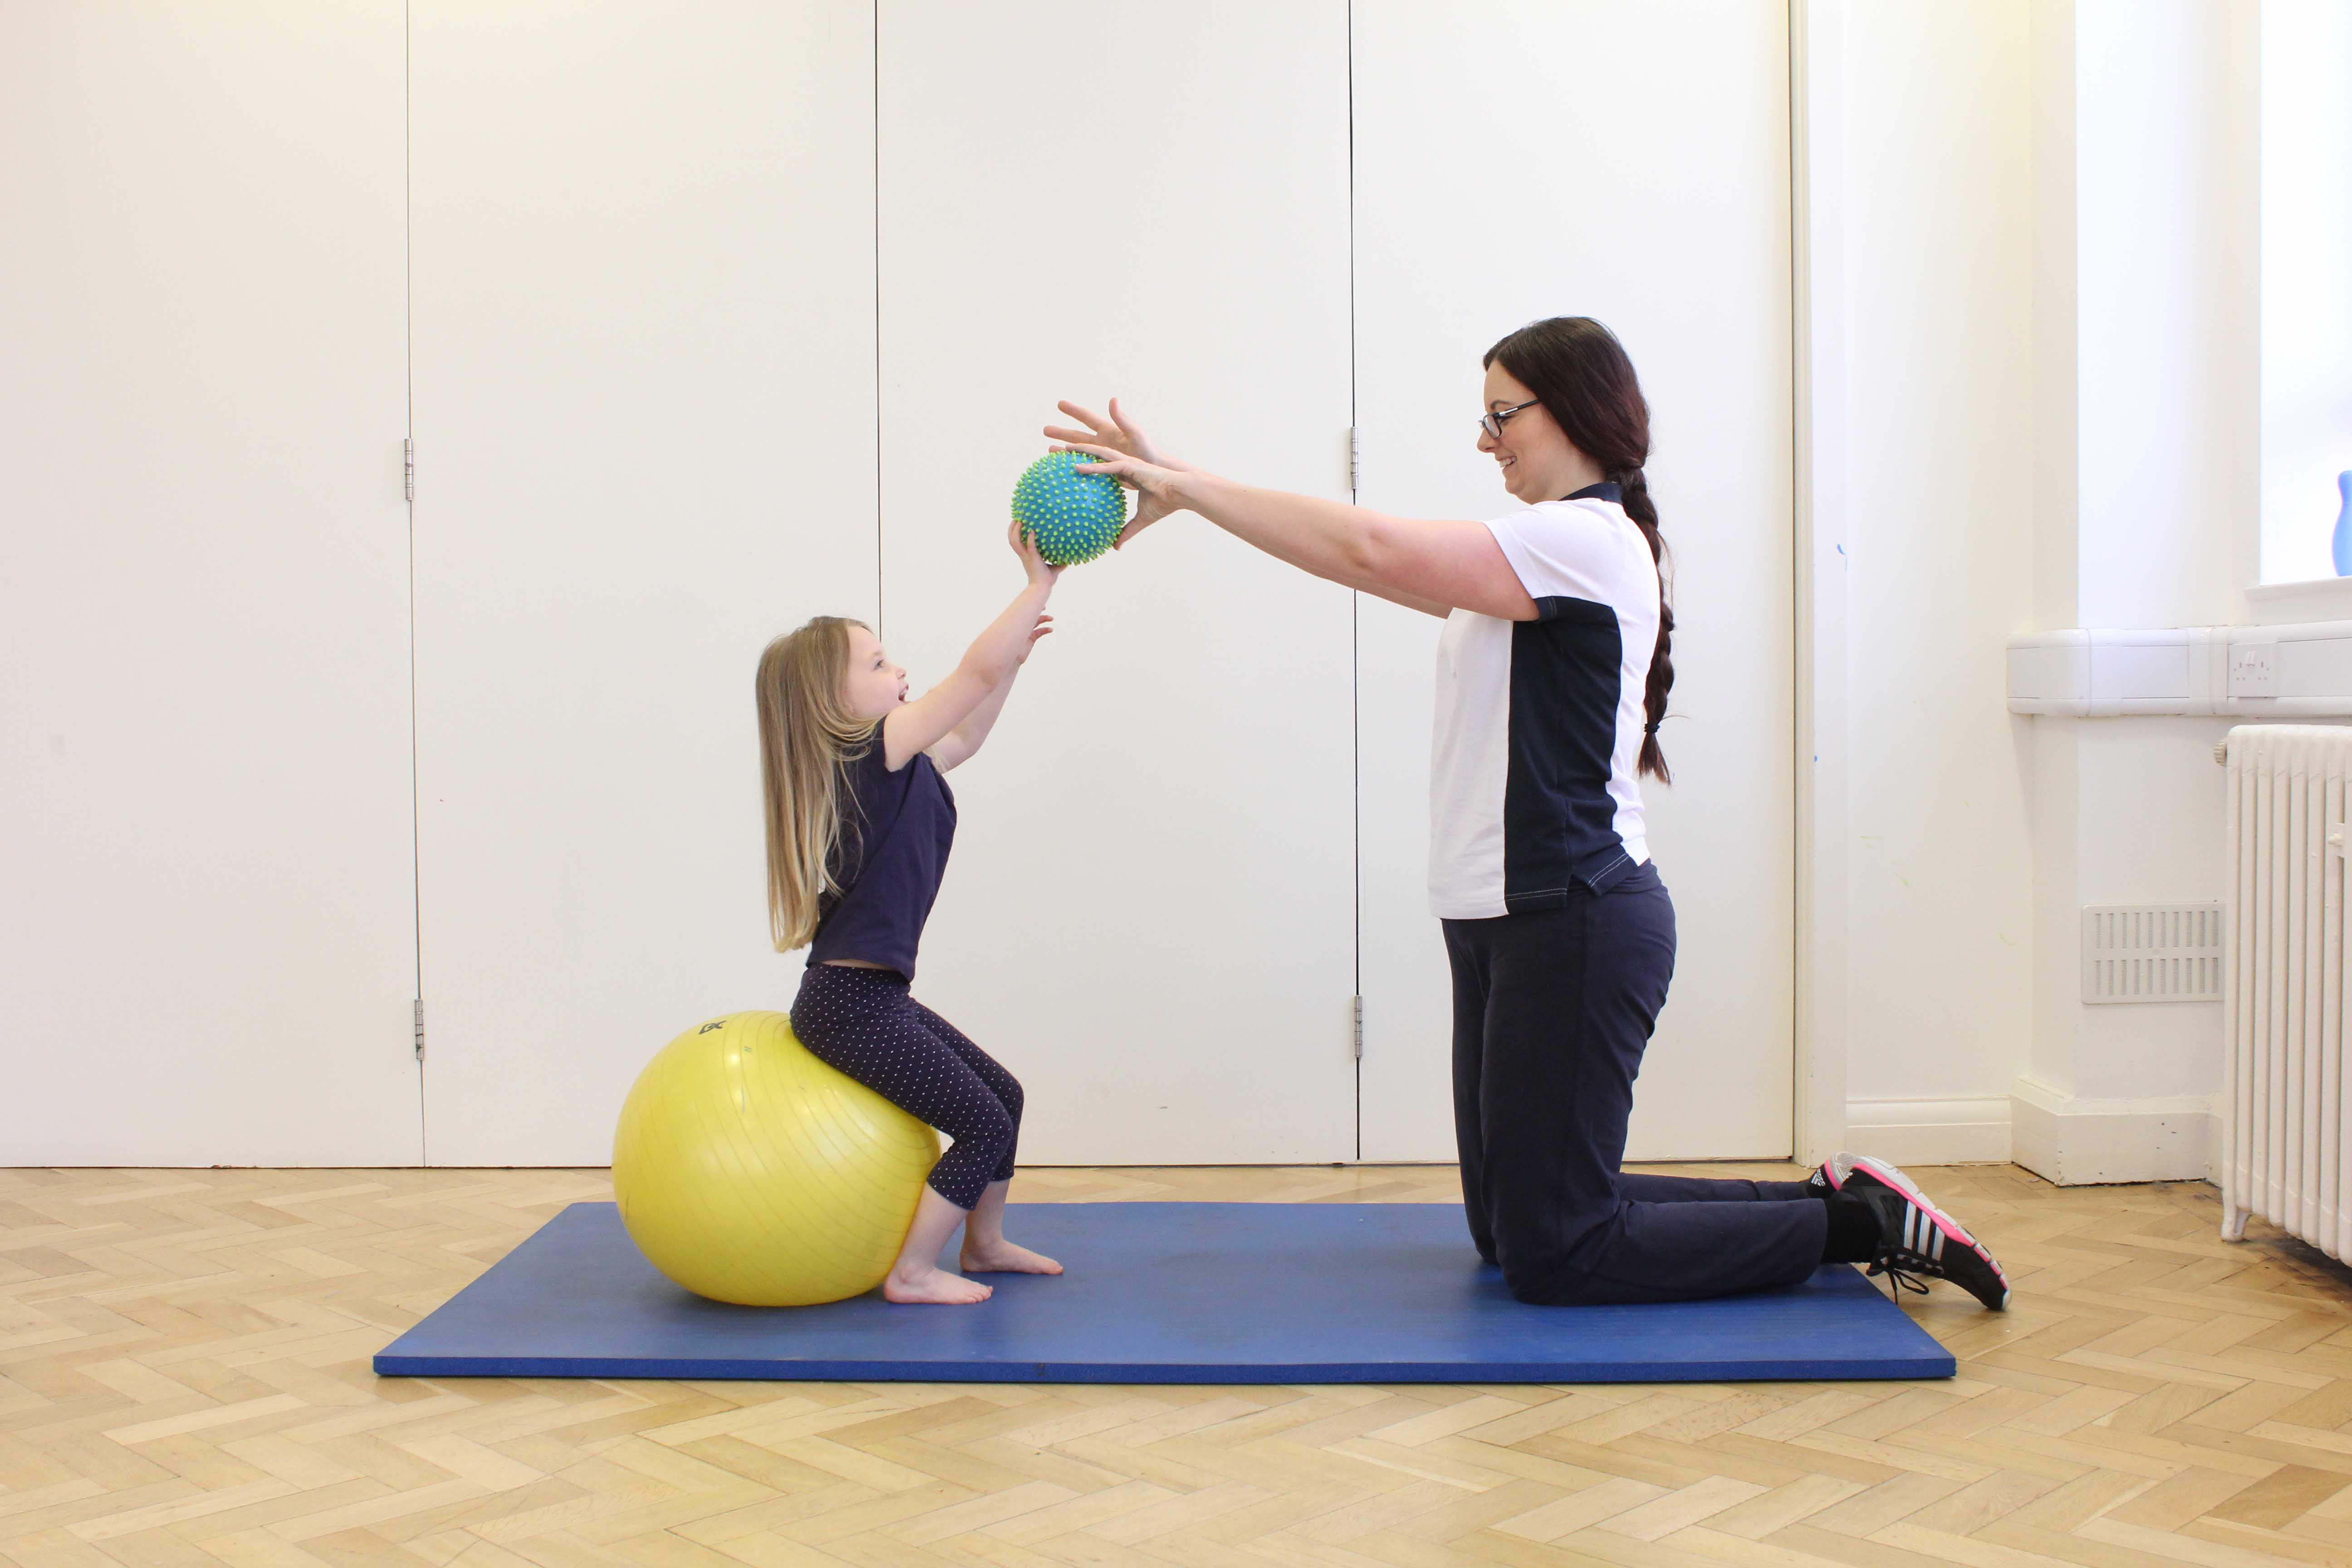 Core stability and strengthening exercises assisted by a paediatric physiotherapist